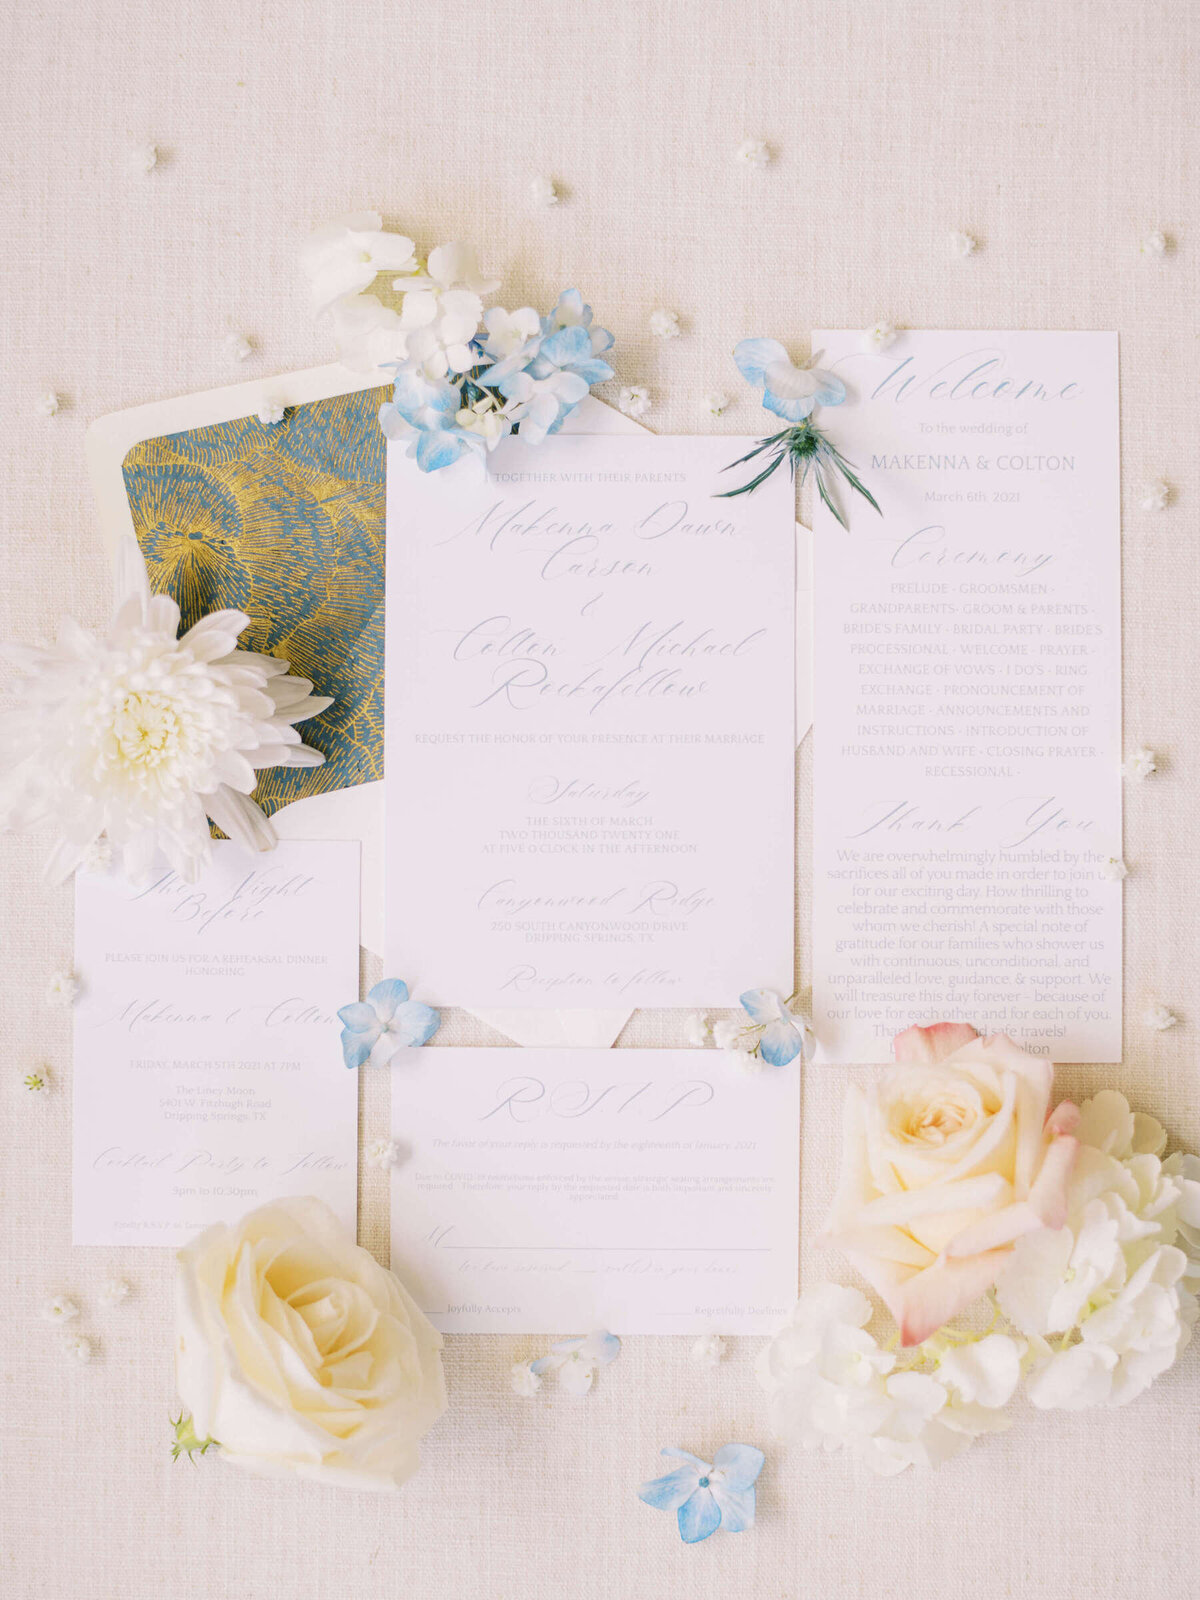 Soft colored wedding invitation suite for ceremony in central Texas